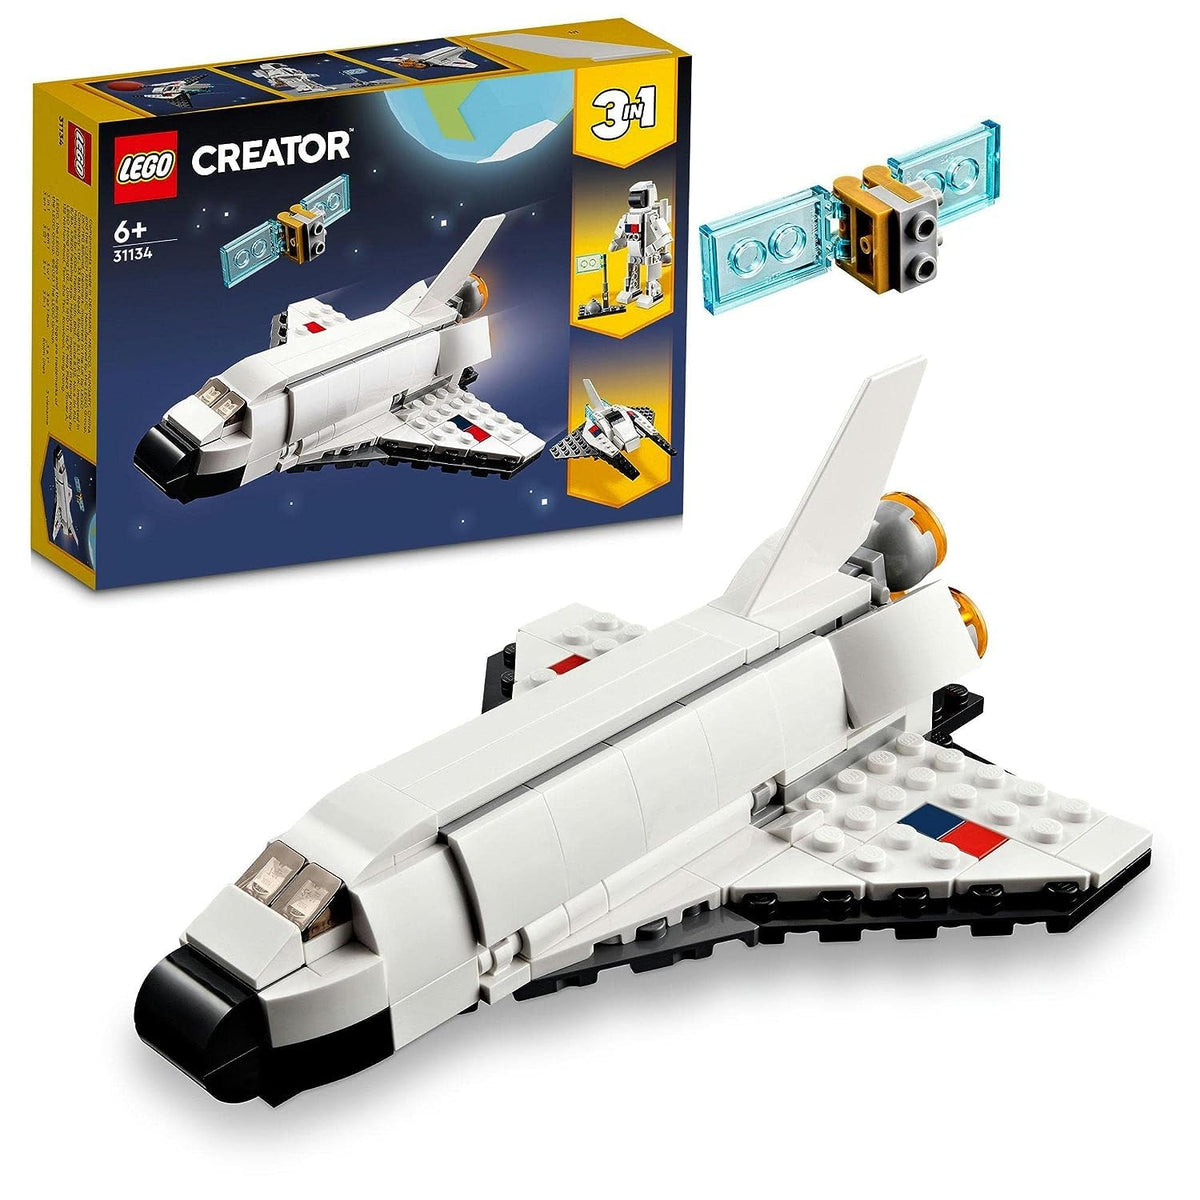 LEGO Creator 3In1 Space Shuttle Building Kit for Ages 6+